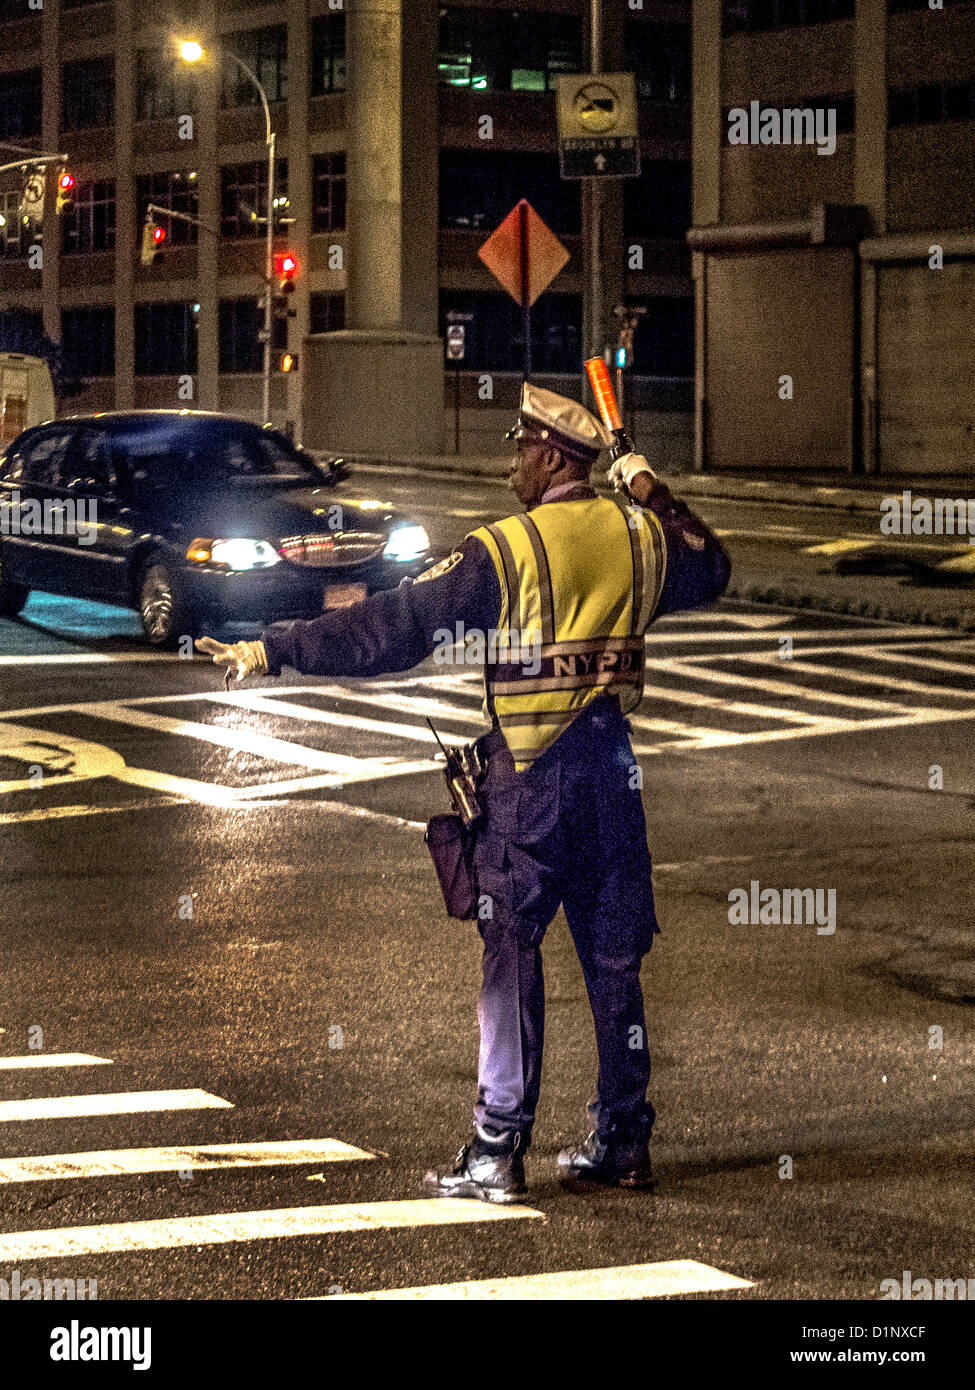 An African American policeman directs traffic at night in New York City in a safety vest. Stock Photo